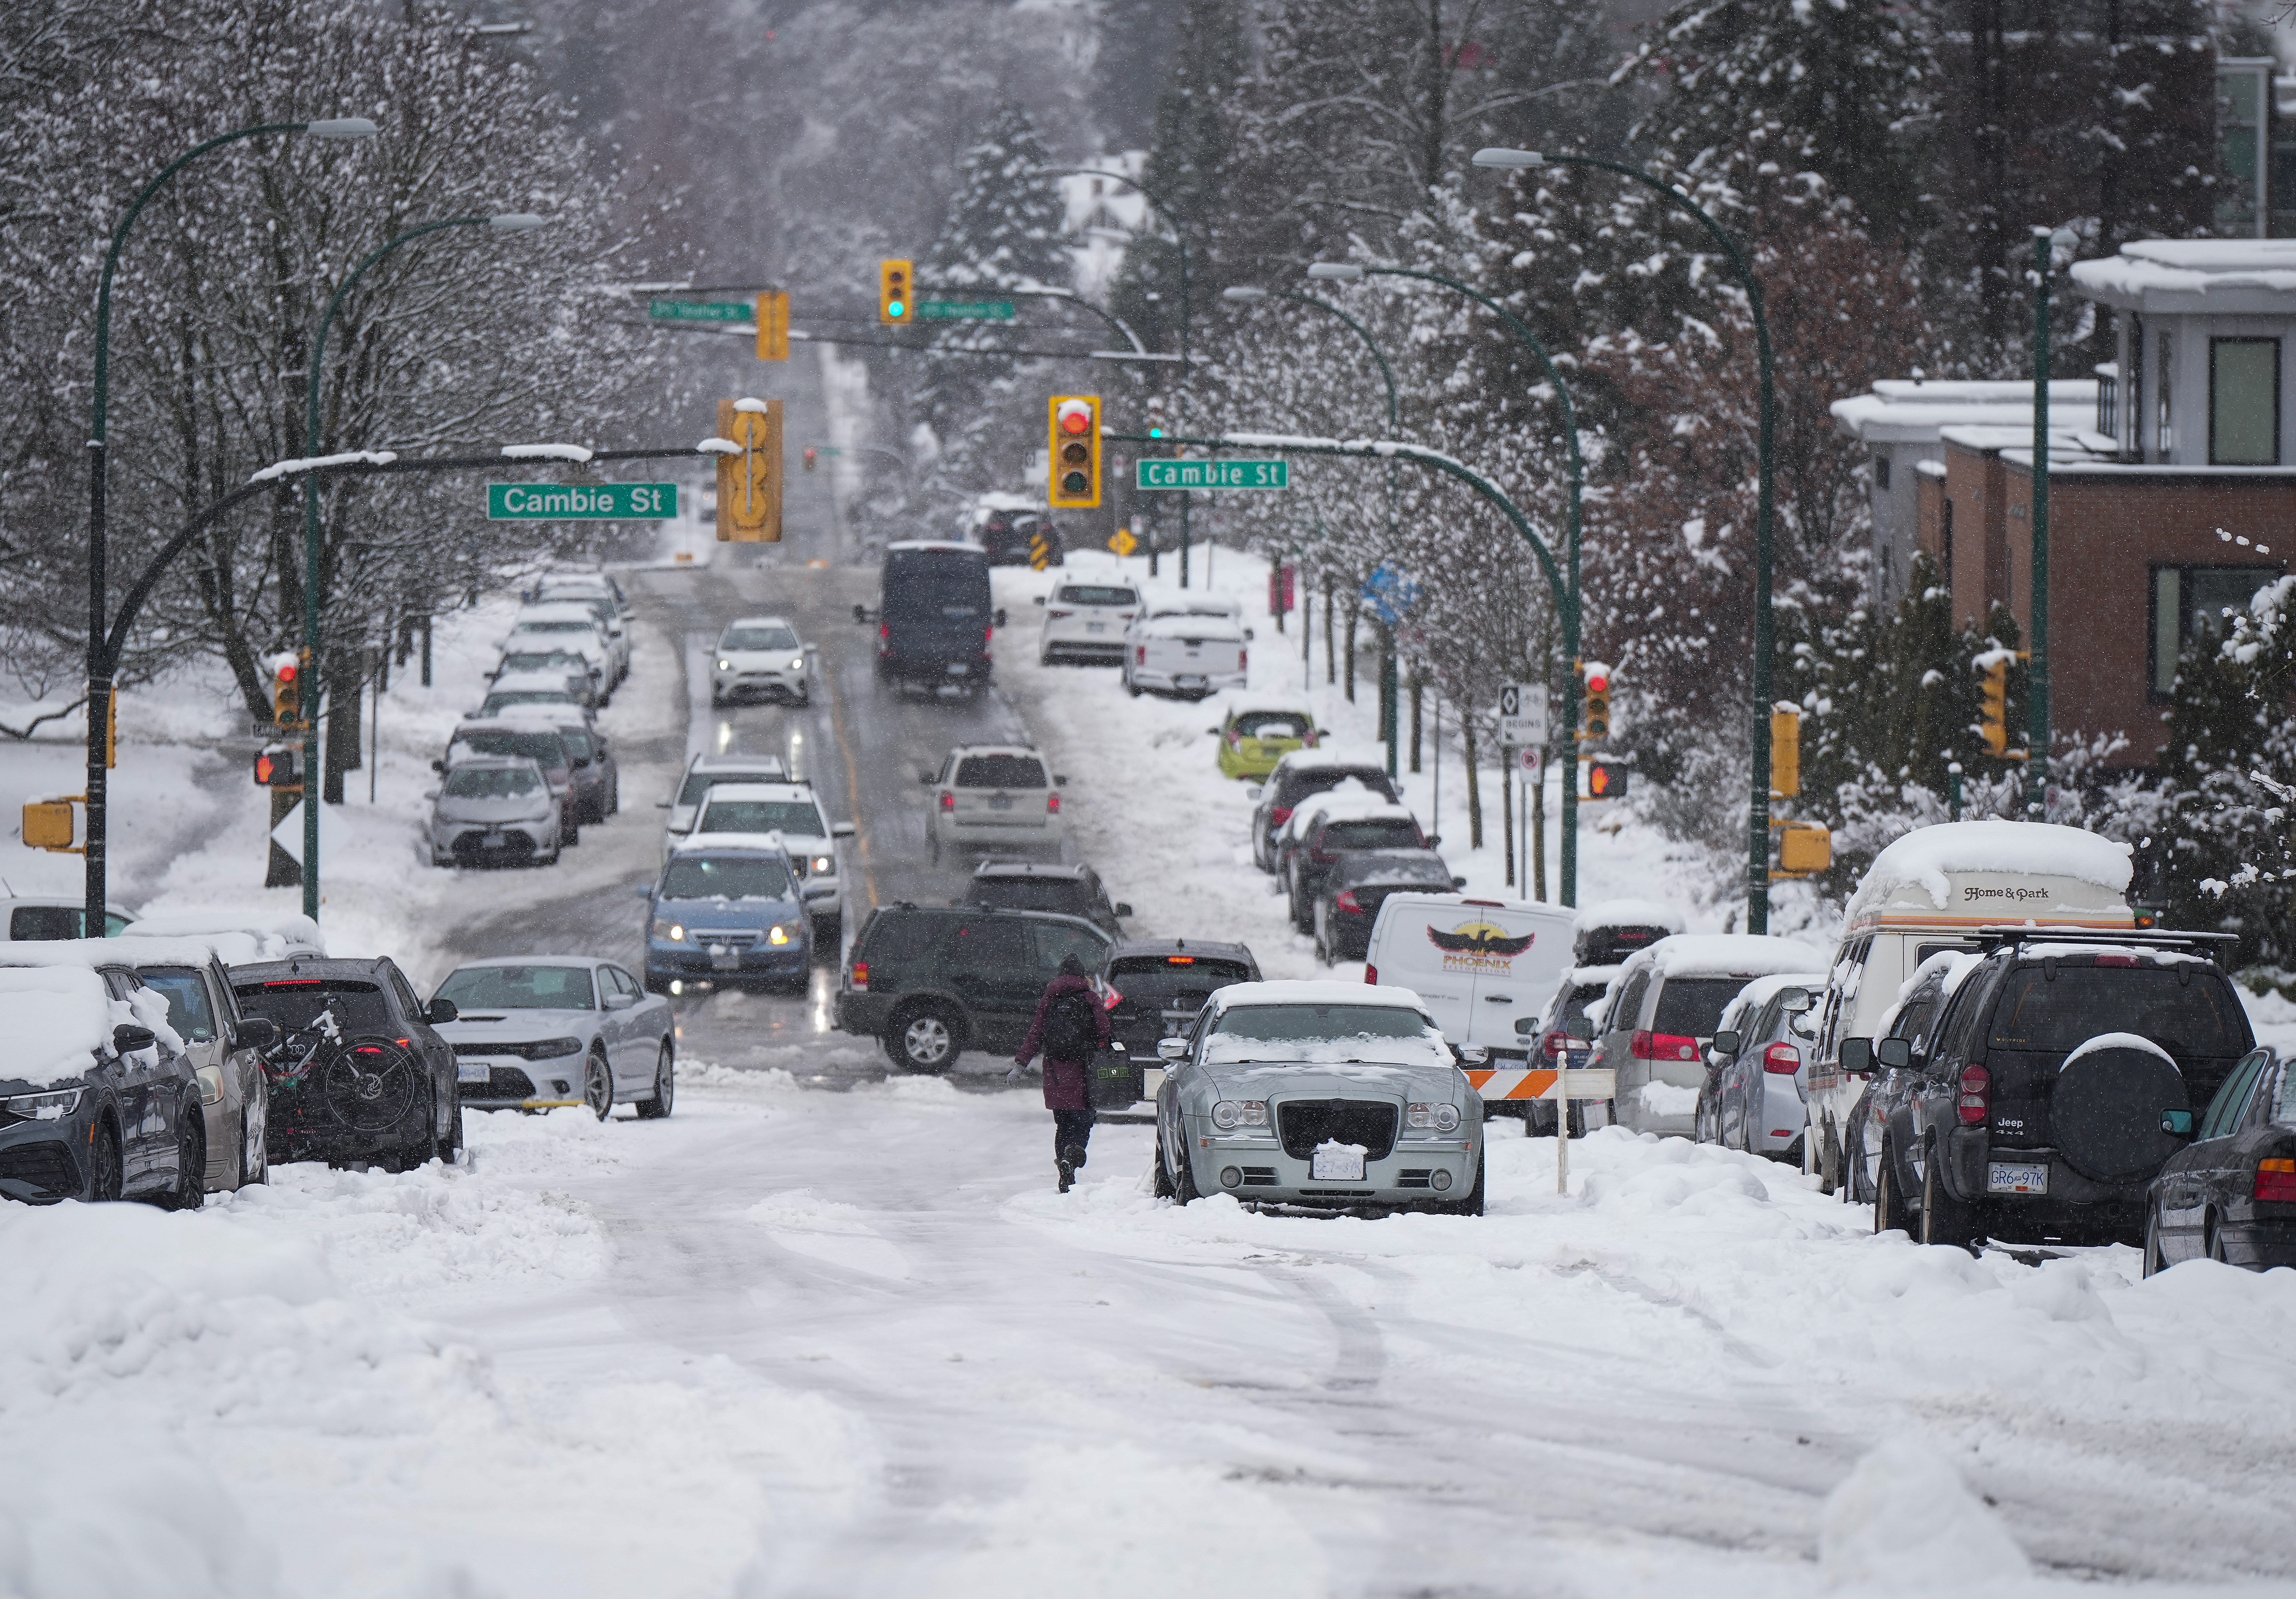 Cost of living in Canada may mean winter tires are put on ice. Here’s why